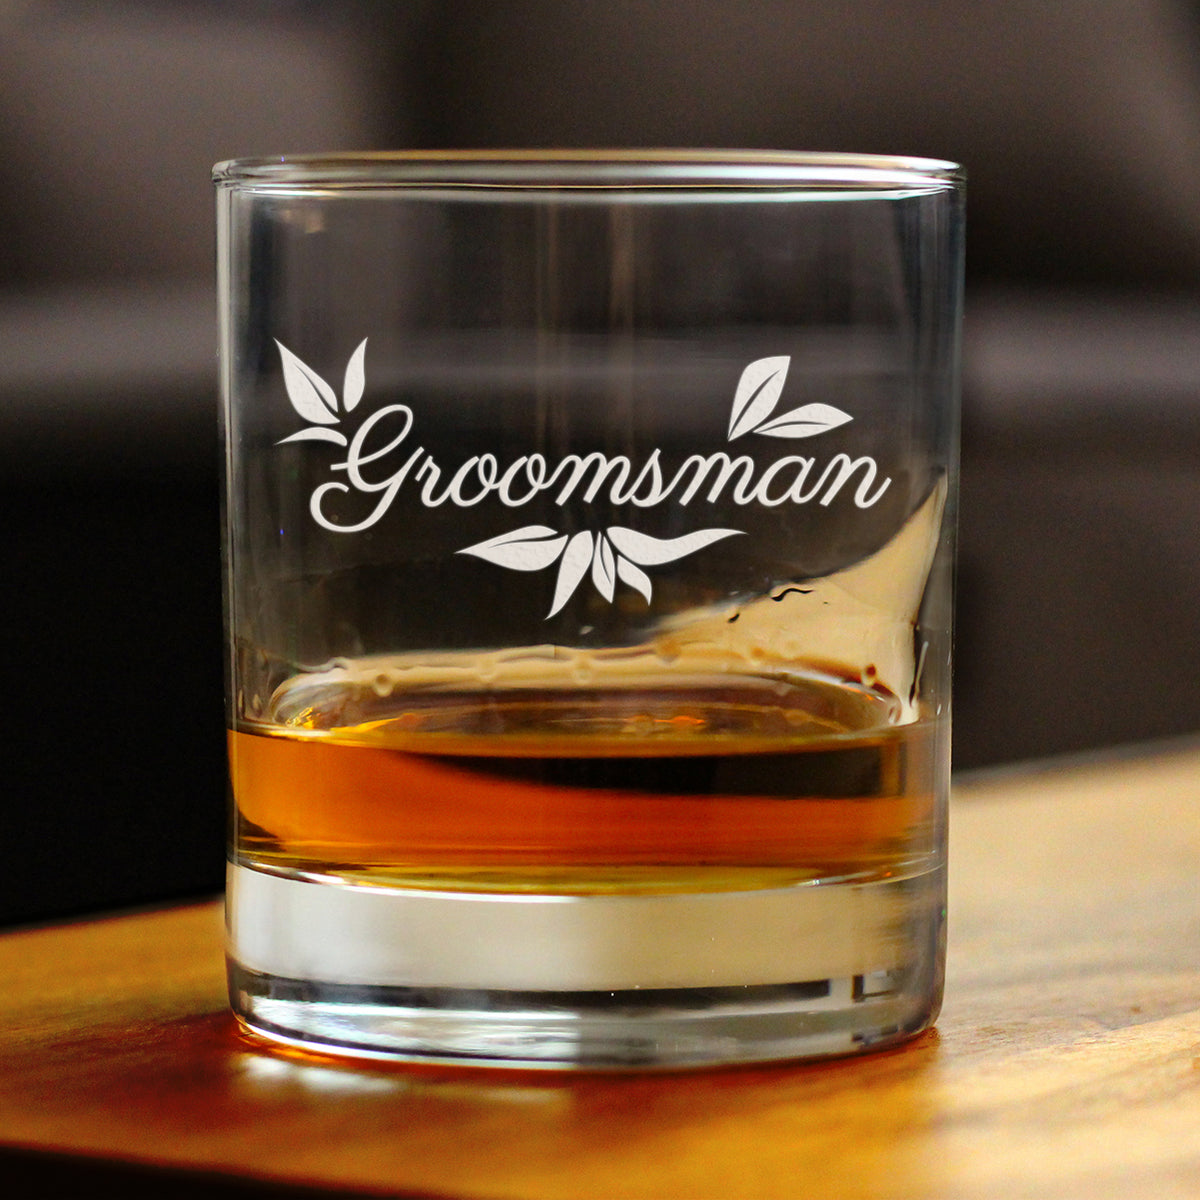 Groomsman Old Fashioned Rocks Glass - Groomsmen Proposal Gifts - Unique Engraved Wedding Cup Gift